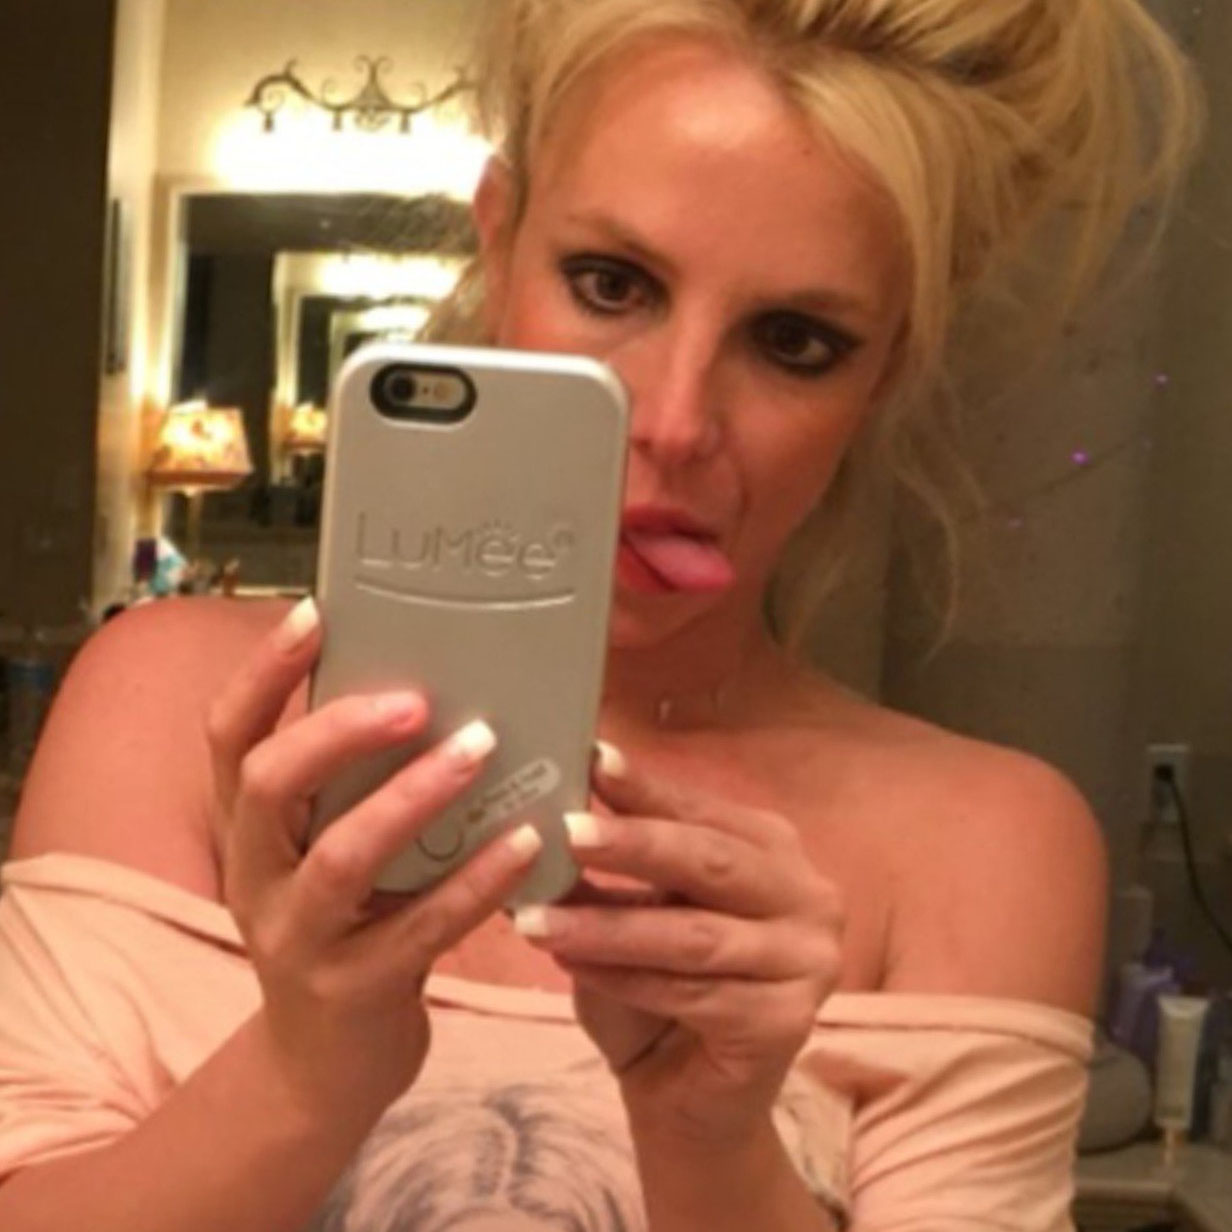 Britney Spears taking a mirror selfie with her phone while sticking her tongue out